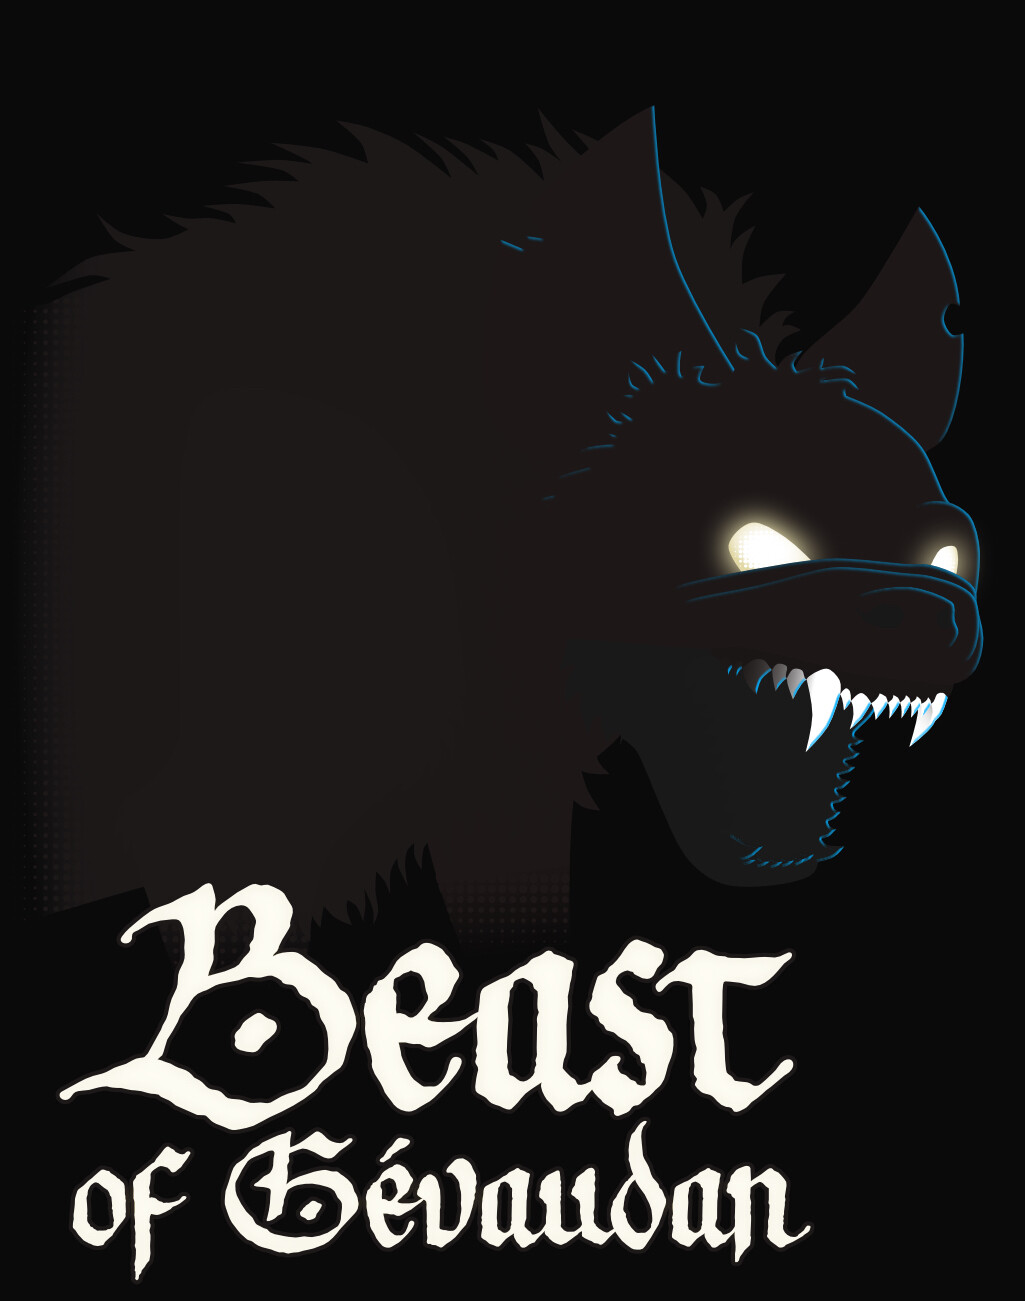 Neato (high-quality t-shirts, large sizes):
https://www.neatoshop.com/product/Cryptid-Legend-Beast-of-G-vaudan
TeePublic (affordable shirts and stickers):
https://www.teepublic.com/t-shirt/36841686-cryptid-legend-beast-of-g-vaudan?store_id=2013963